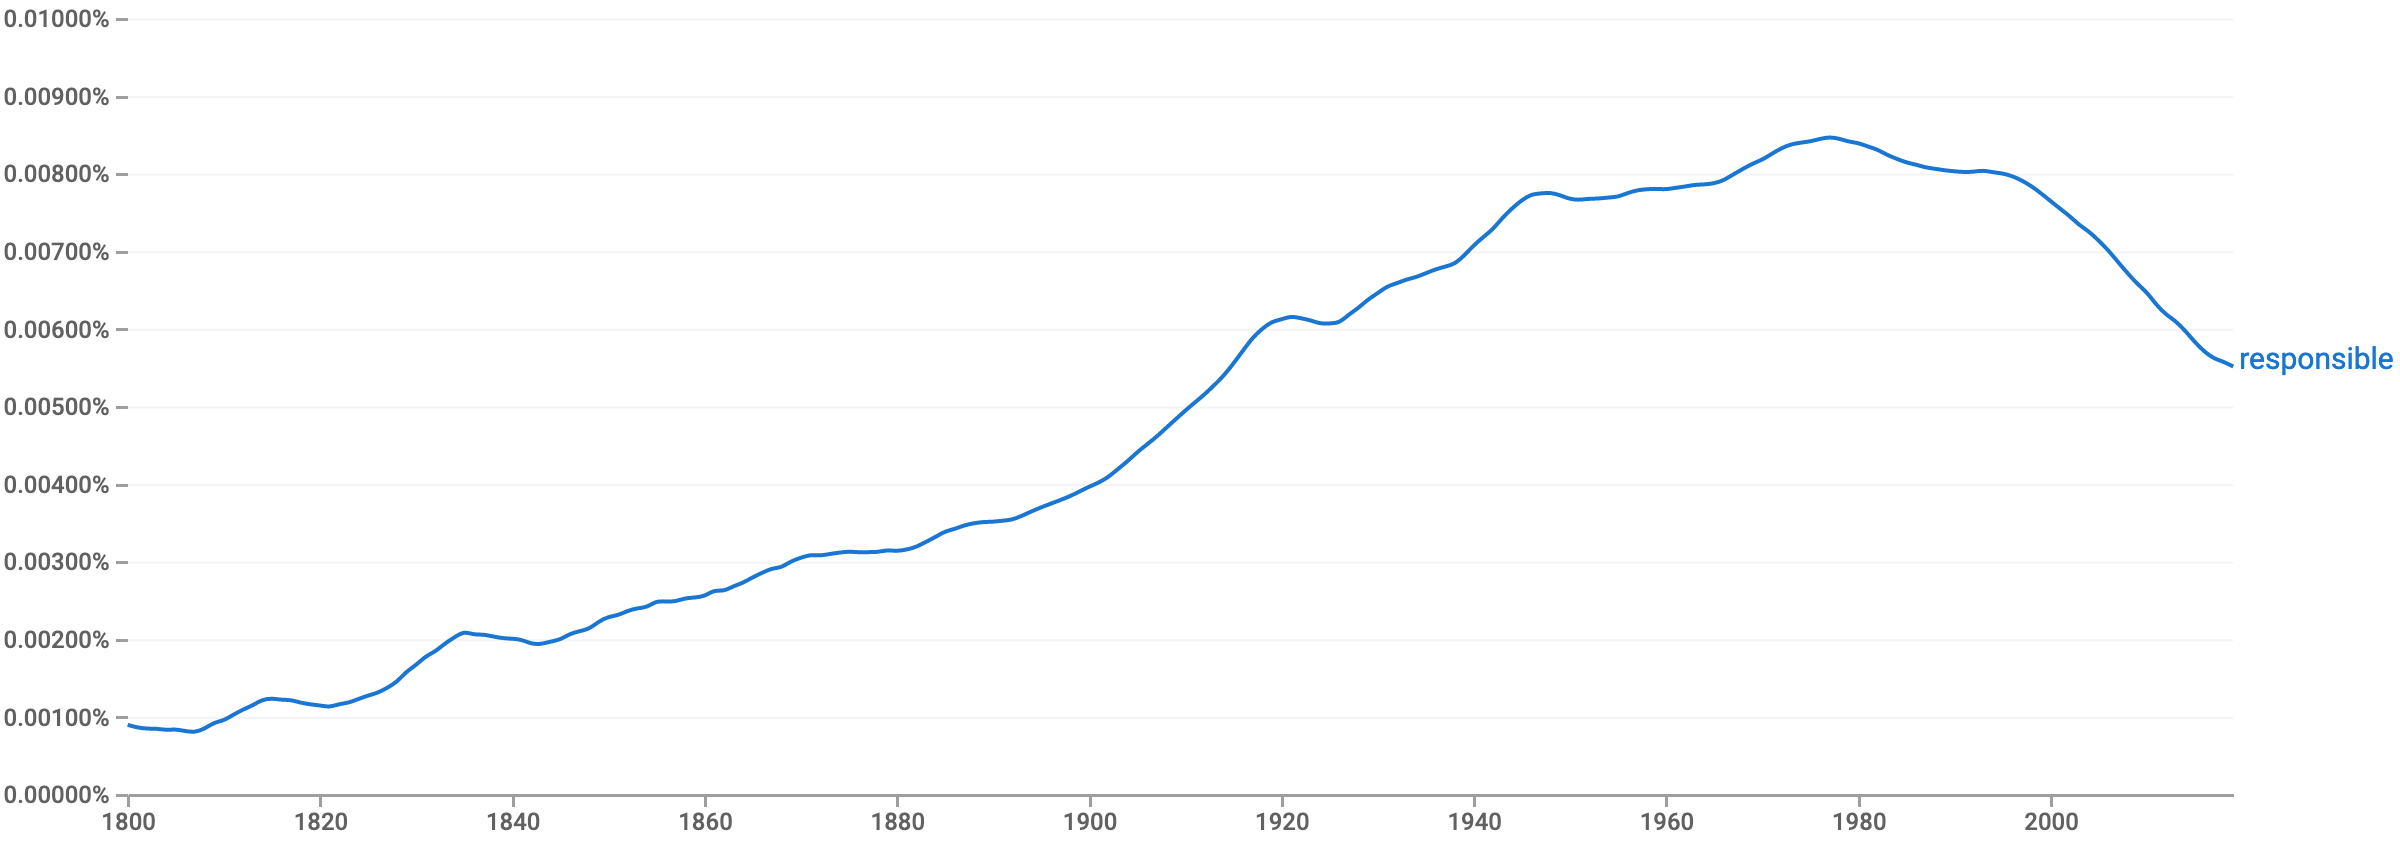 Screenshot of Google Ngram Viewer showing usage over time of the word "responsible".